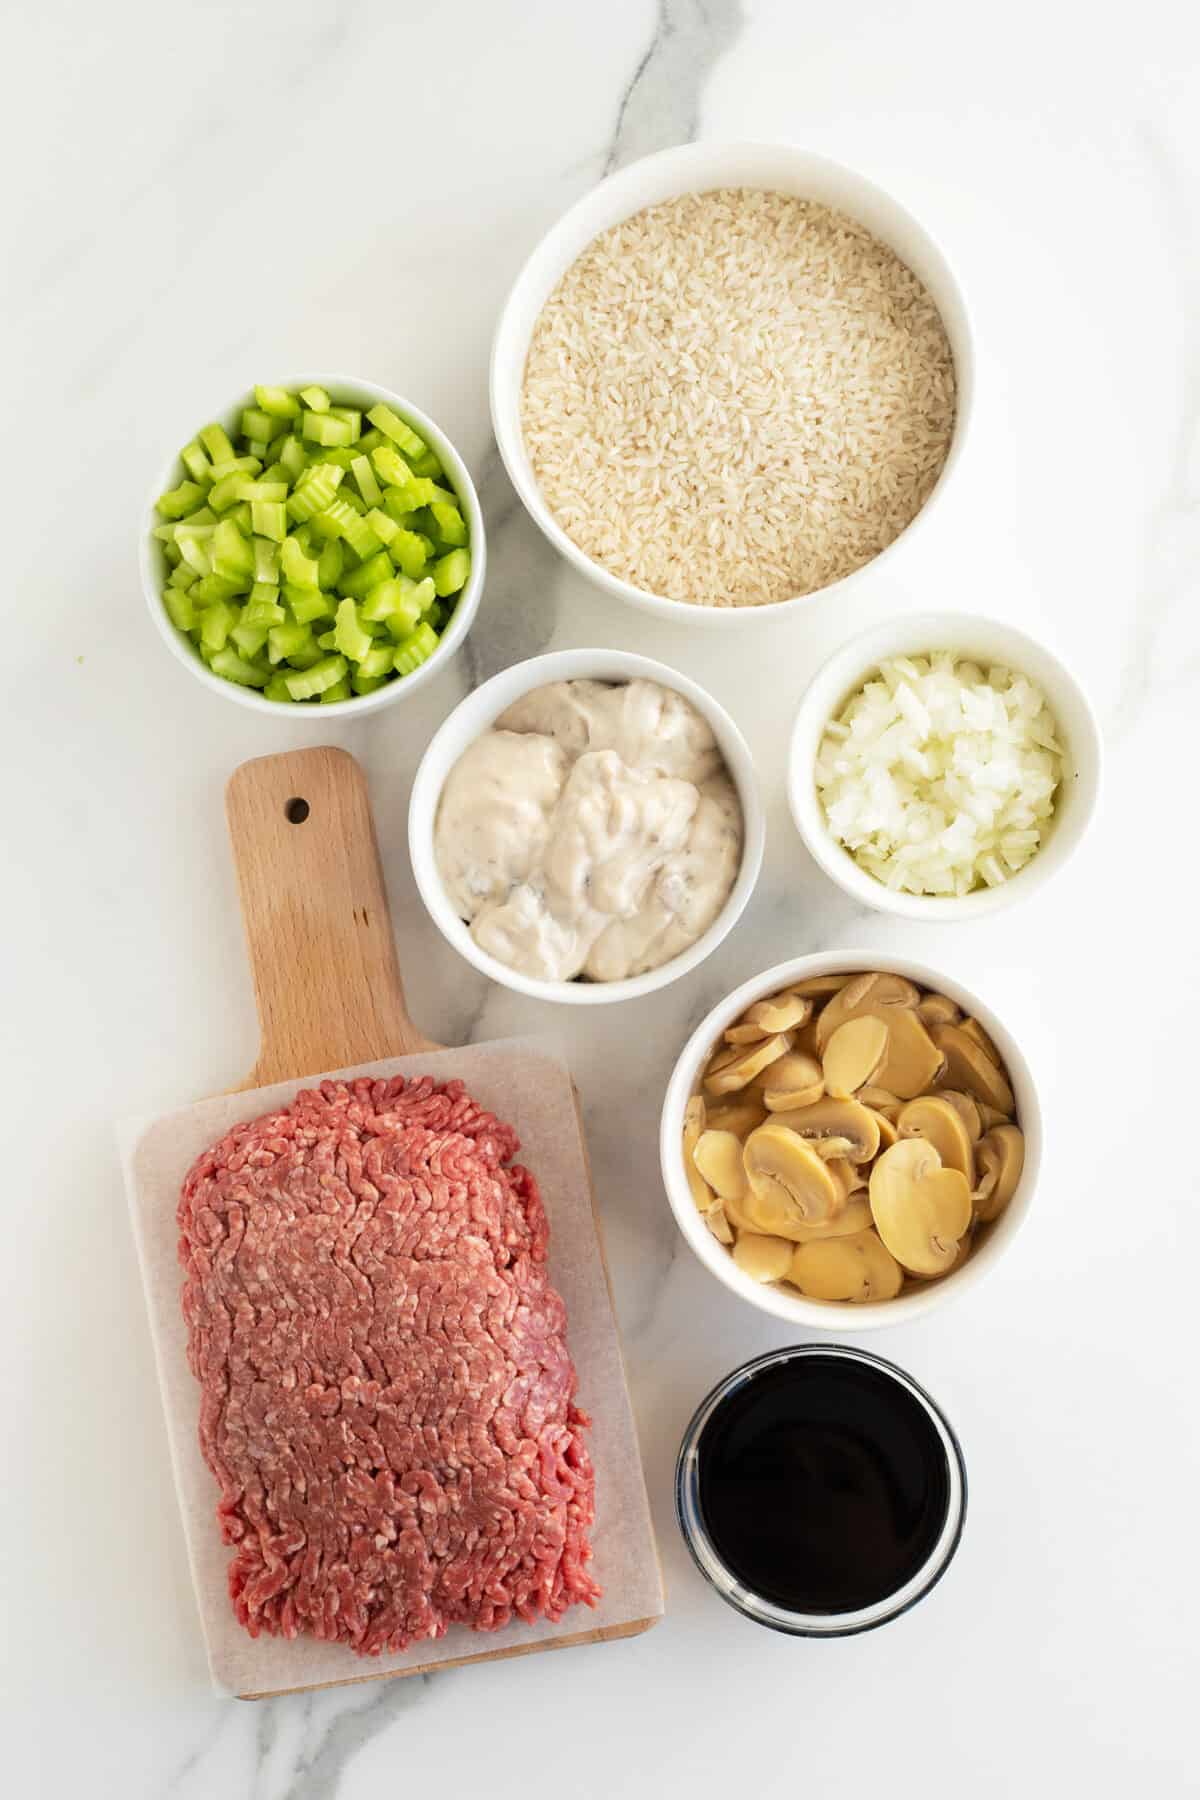 ground beef and rice ingredients in small clear bowls and a cuttingboard with raw beef